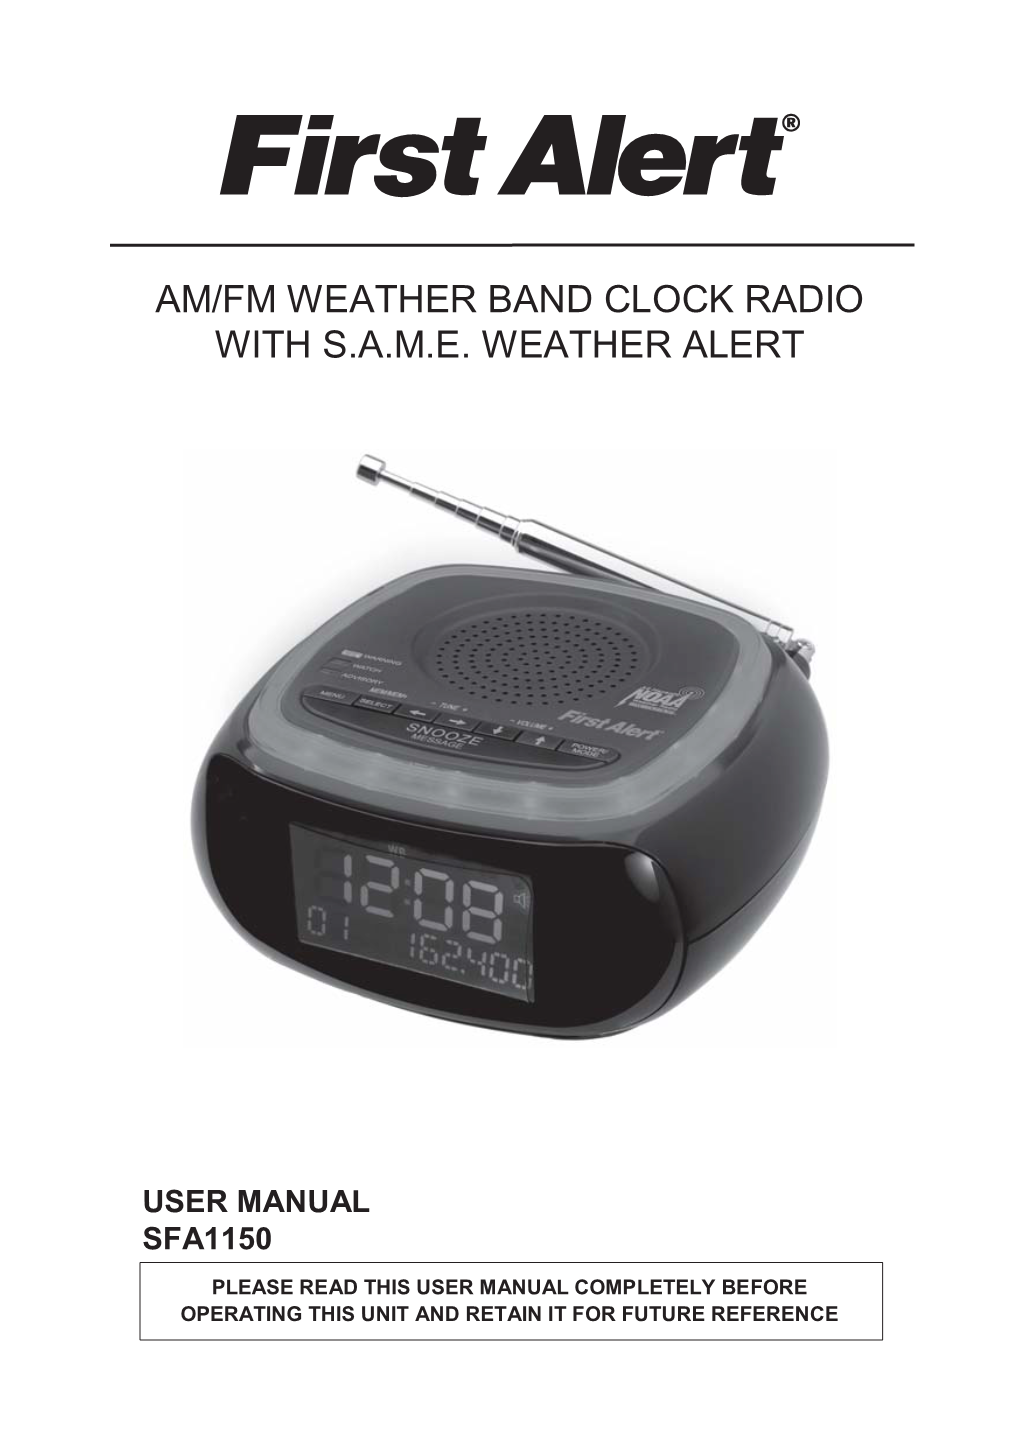 Am/Fm Weather Band Clock Radio with S.A.M.E. Weather Alert